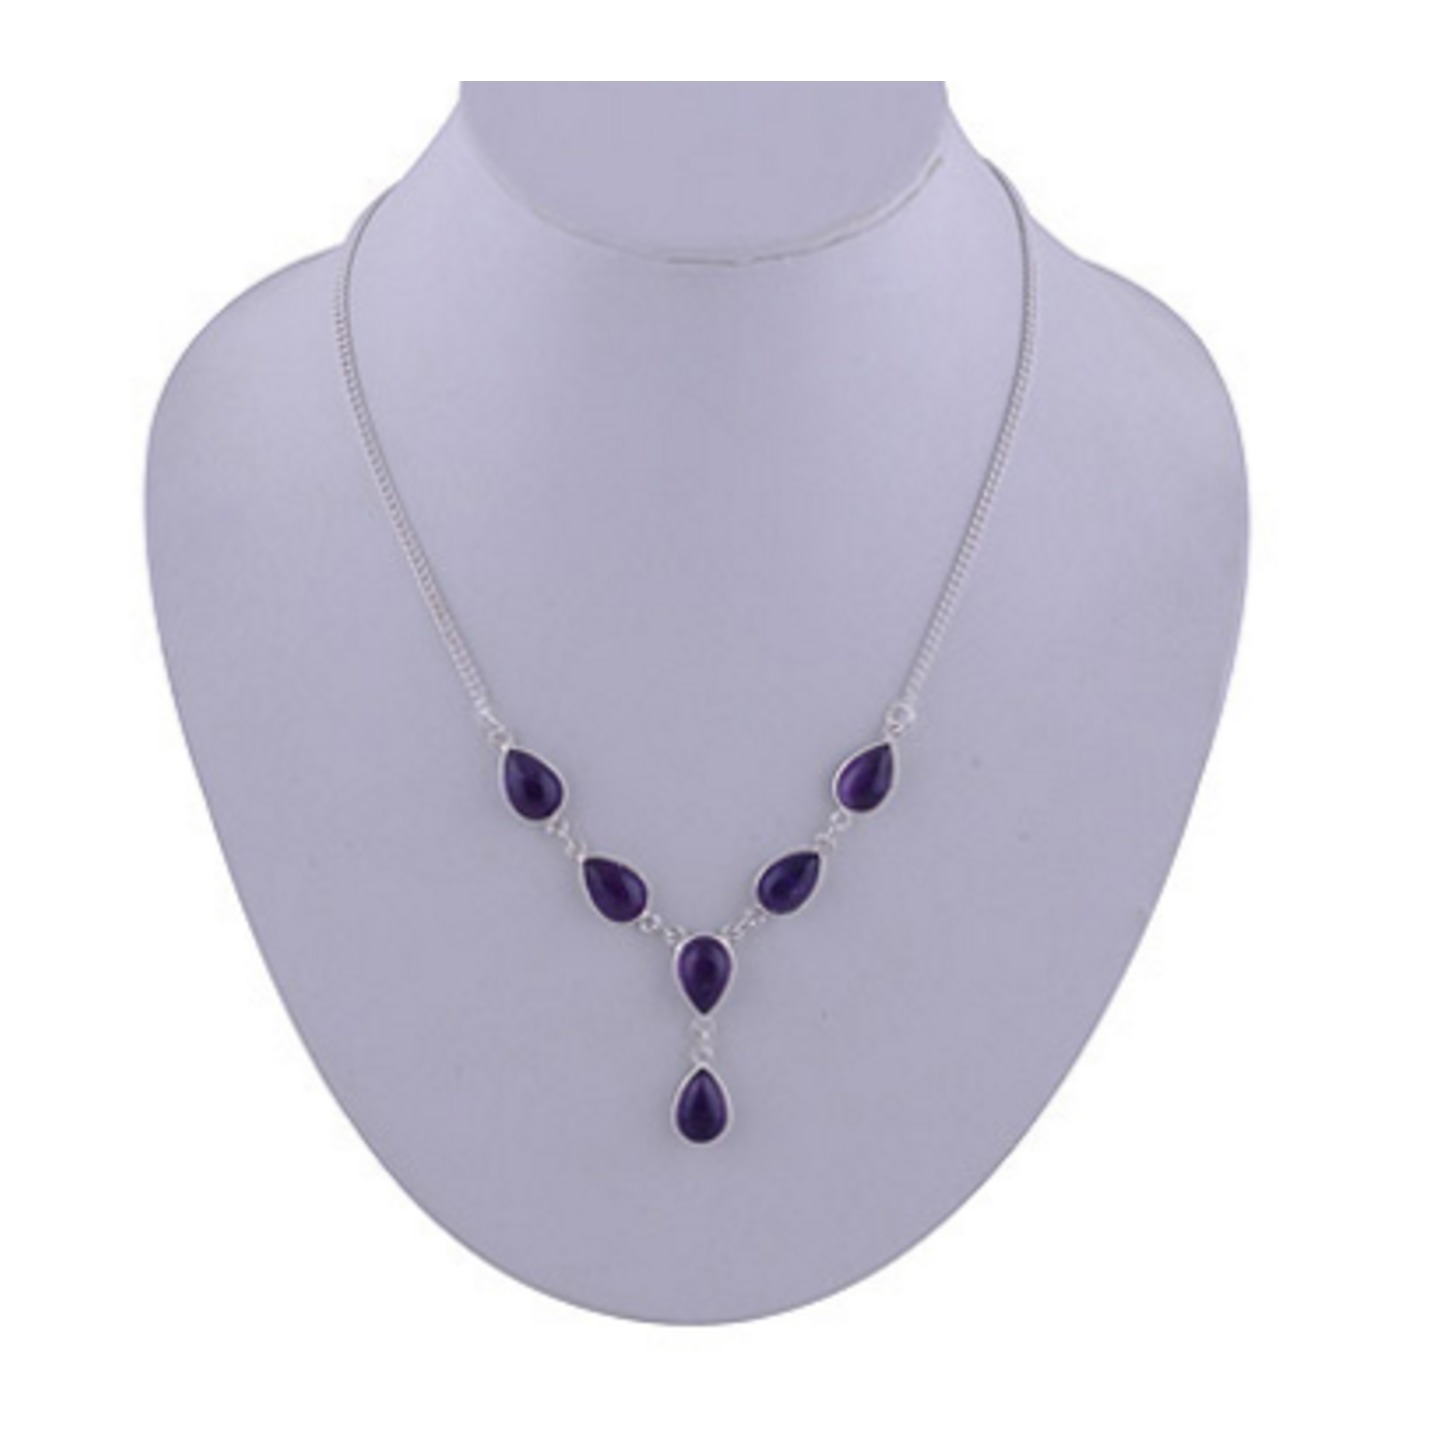 The Amethyst Silver Necklace